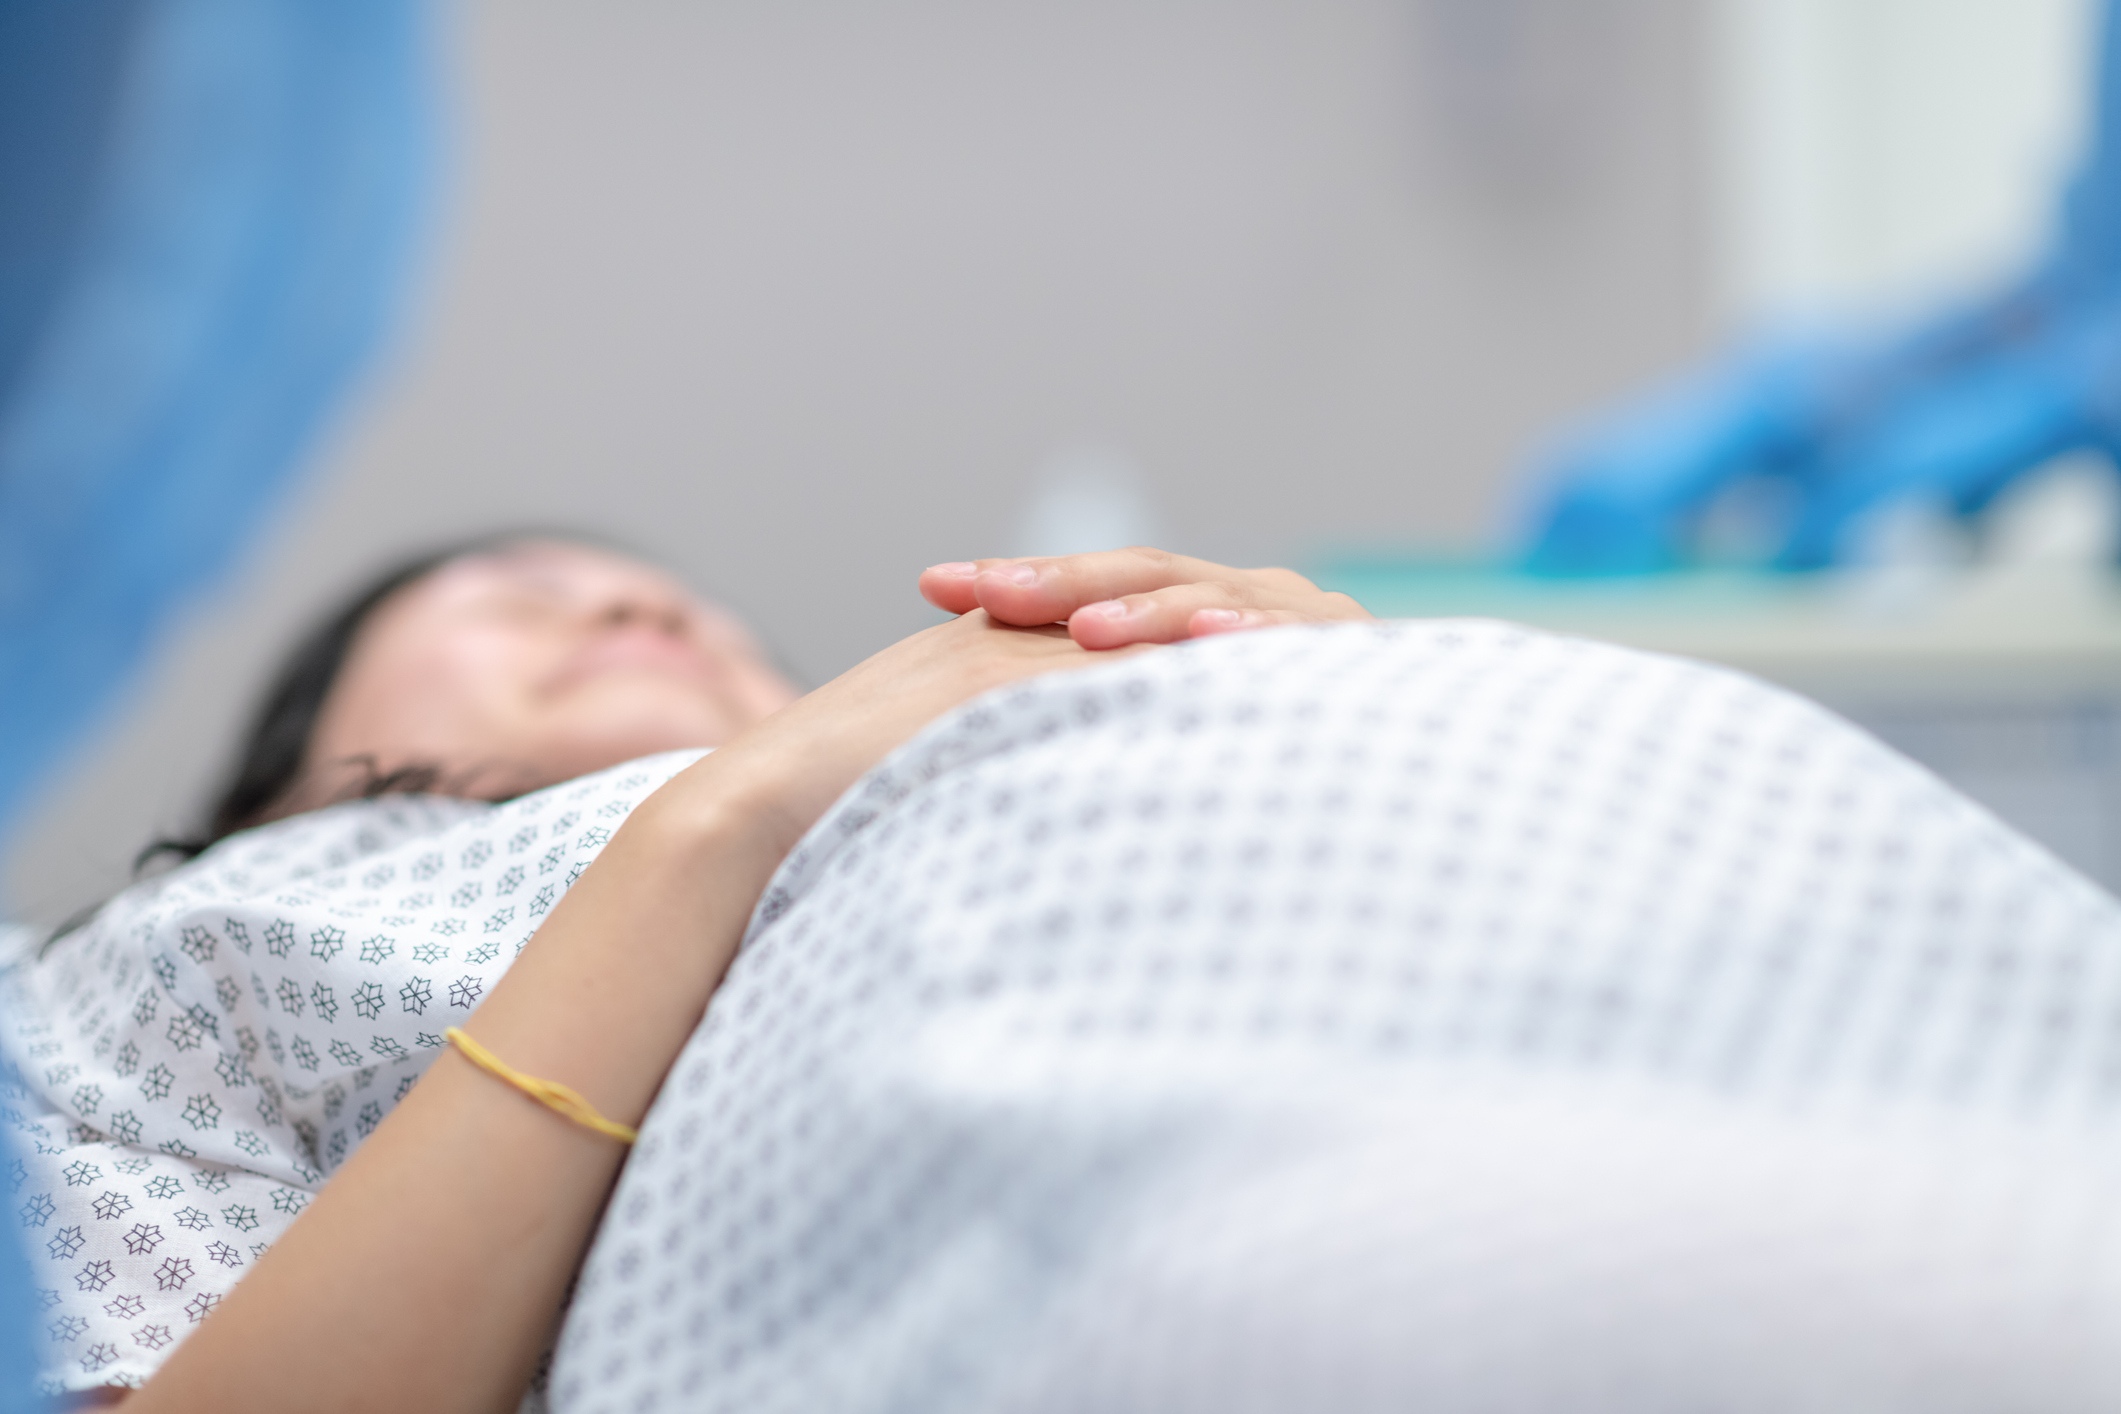 A pregnant woman lying down and wearing a hospital gown